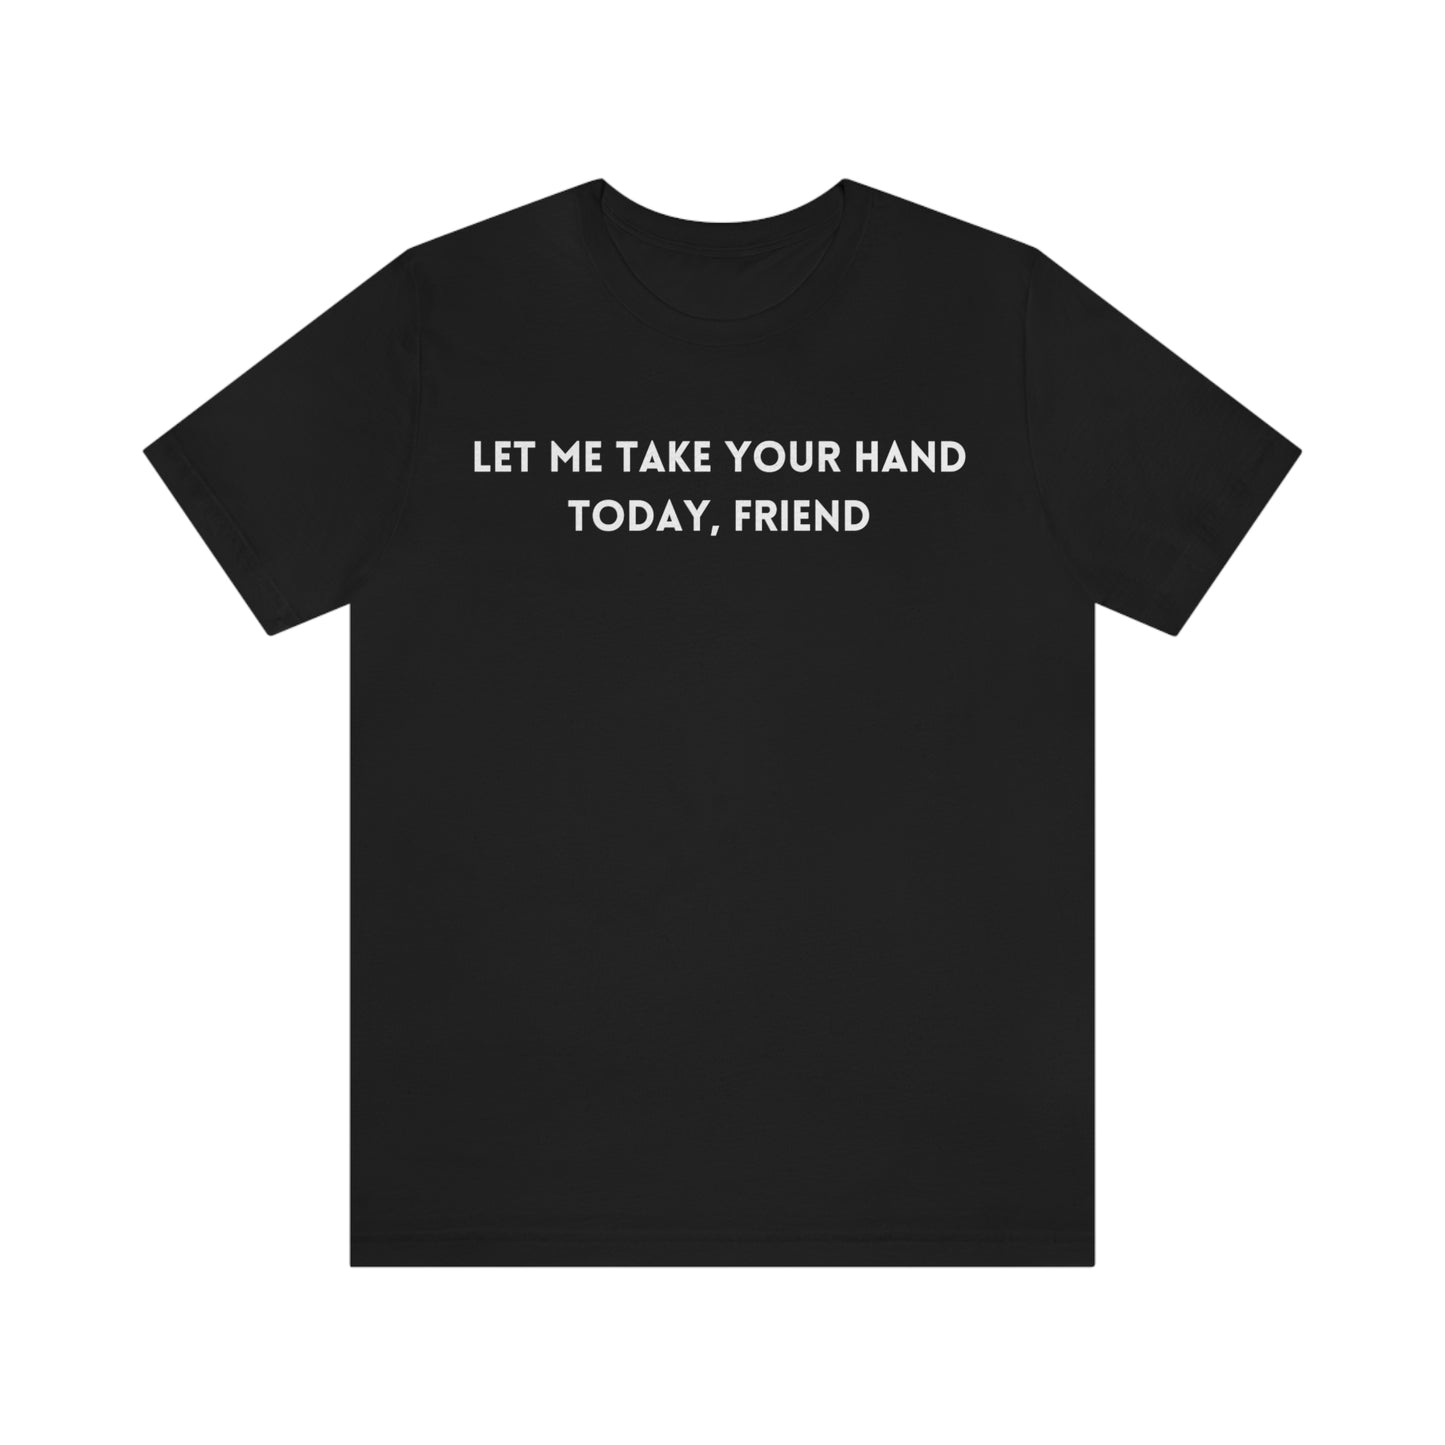 Let me take your hand today friend tee shirt, inspirational words tshirt, tshirt gift for caring friends, self affirming words t shirts